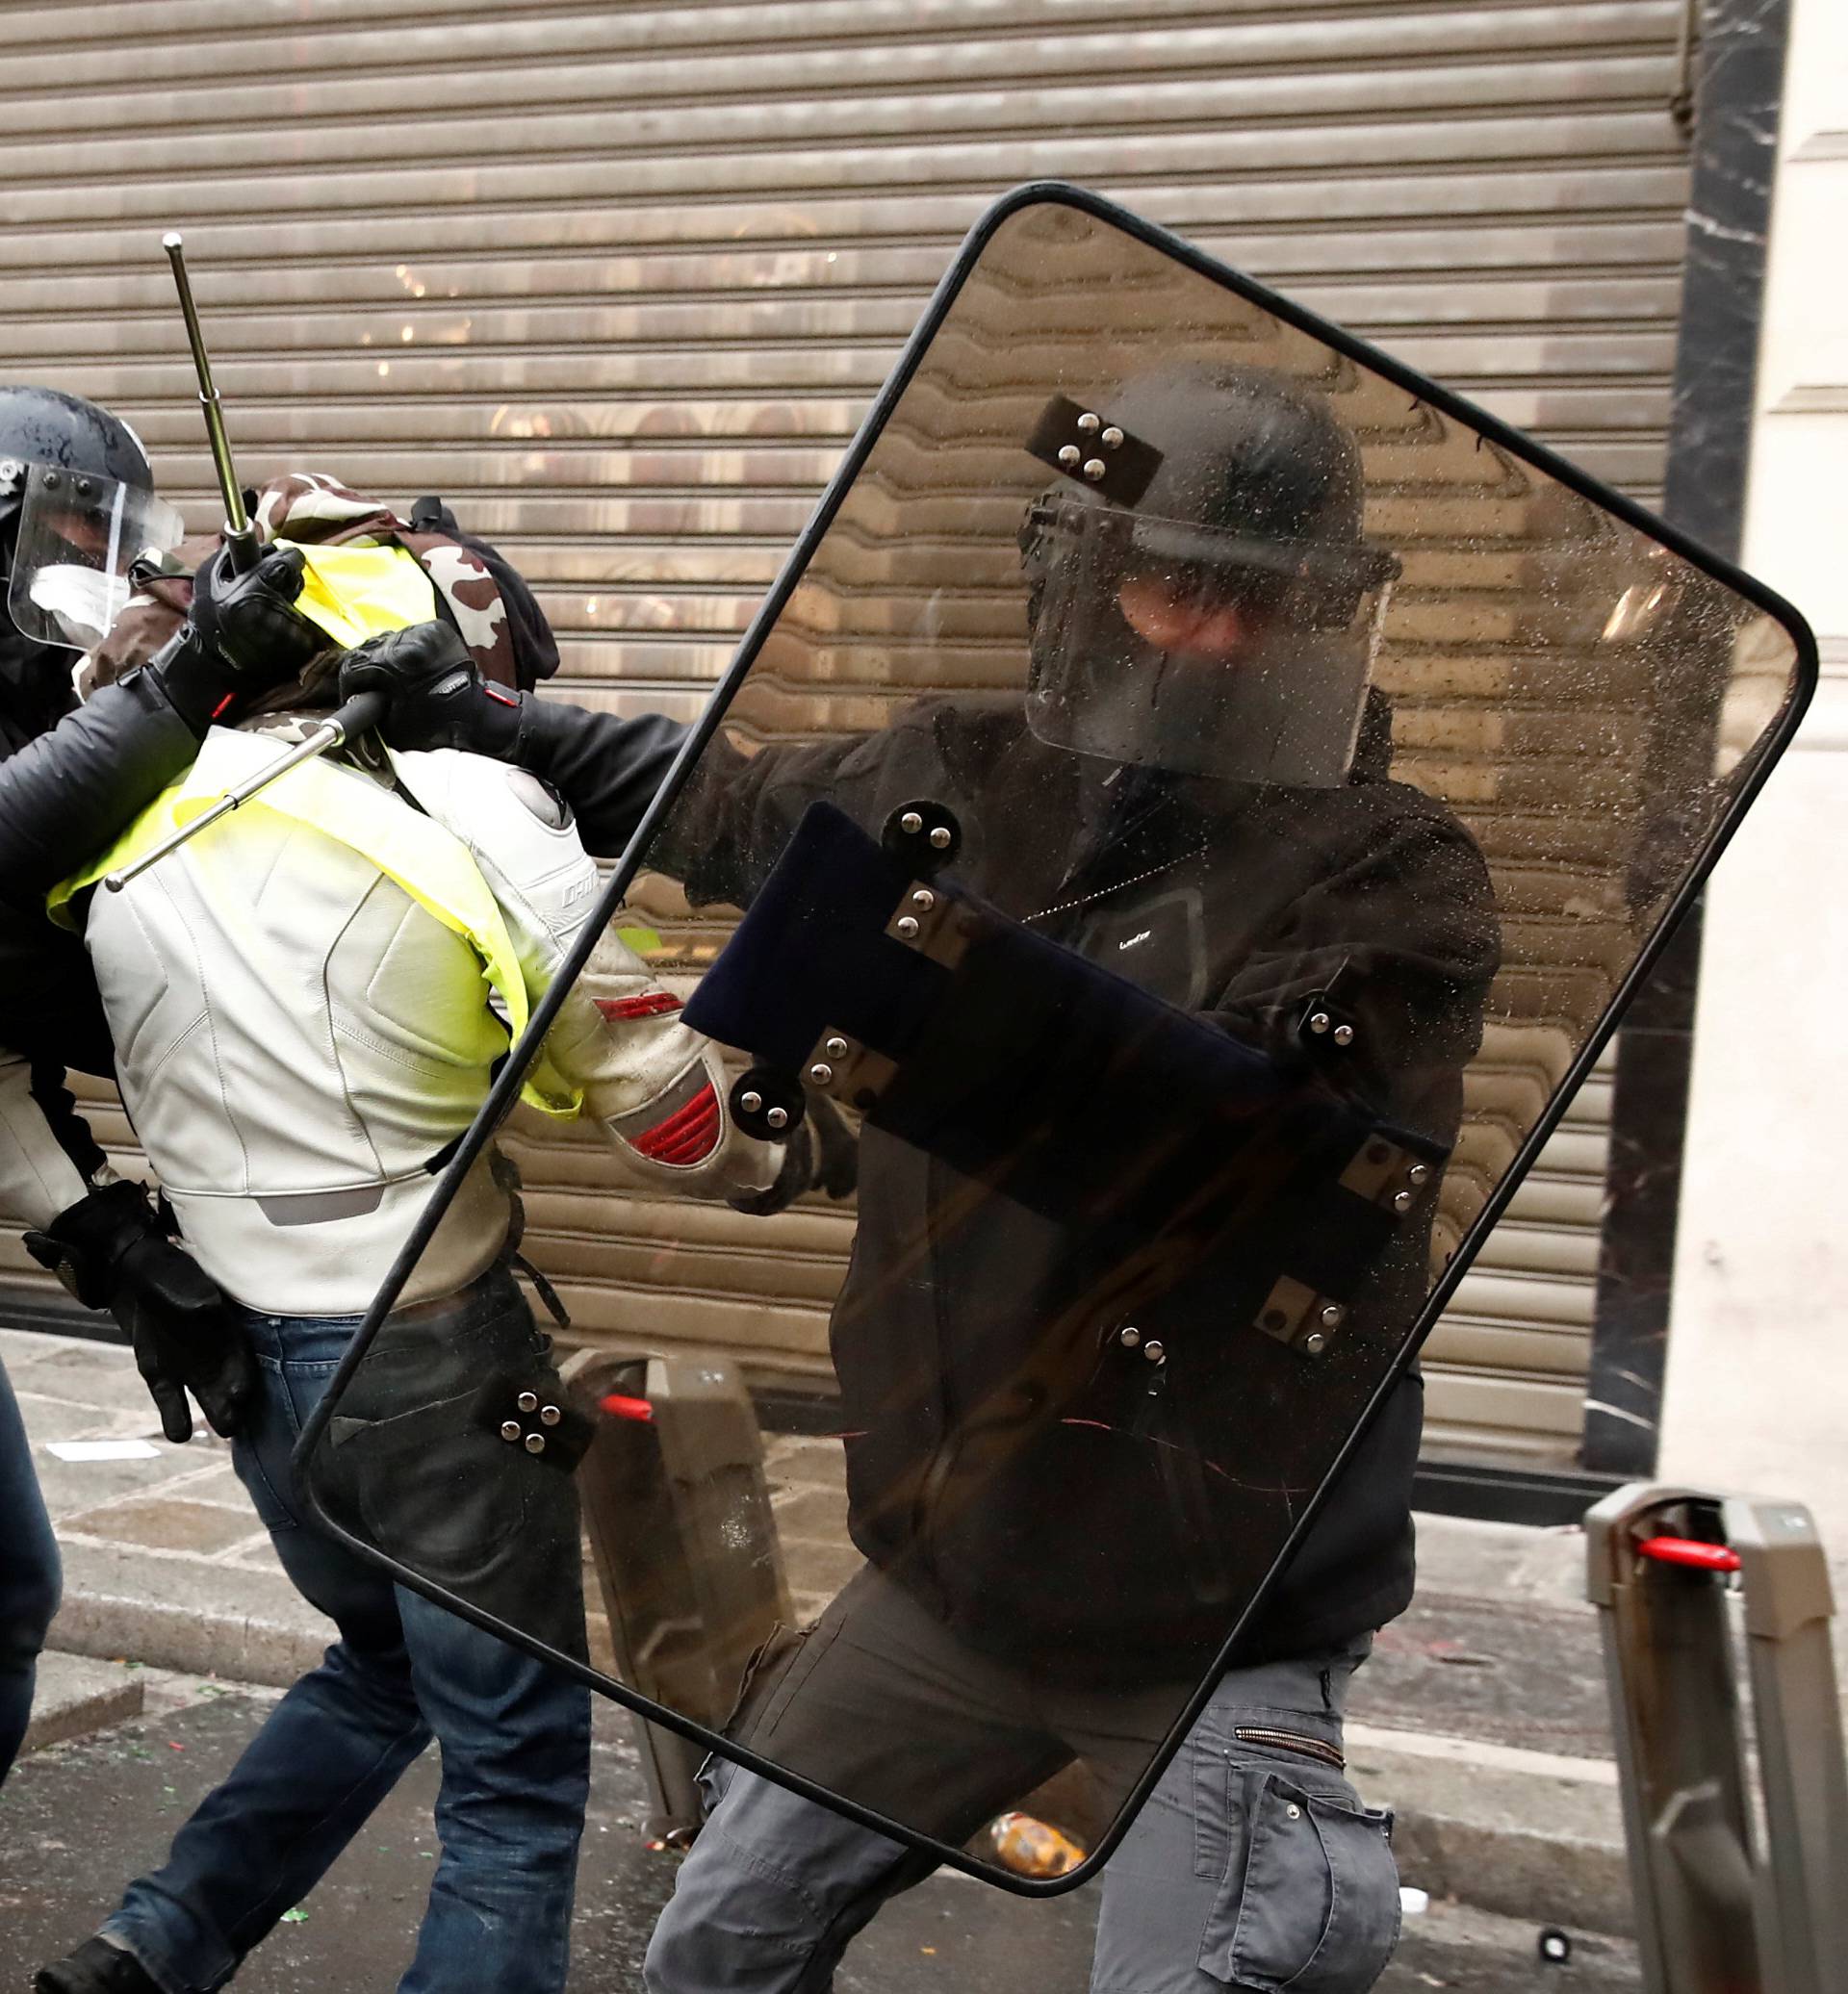 French police apprehend a protester wearing a yellow vest during clashes with police during a national day of protest by the "yellow vests" movement in Paris